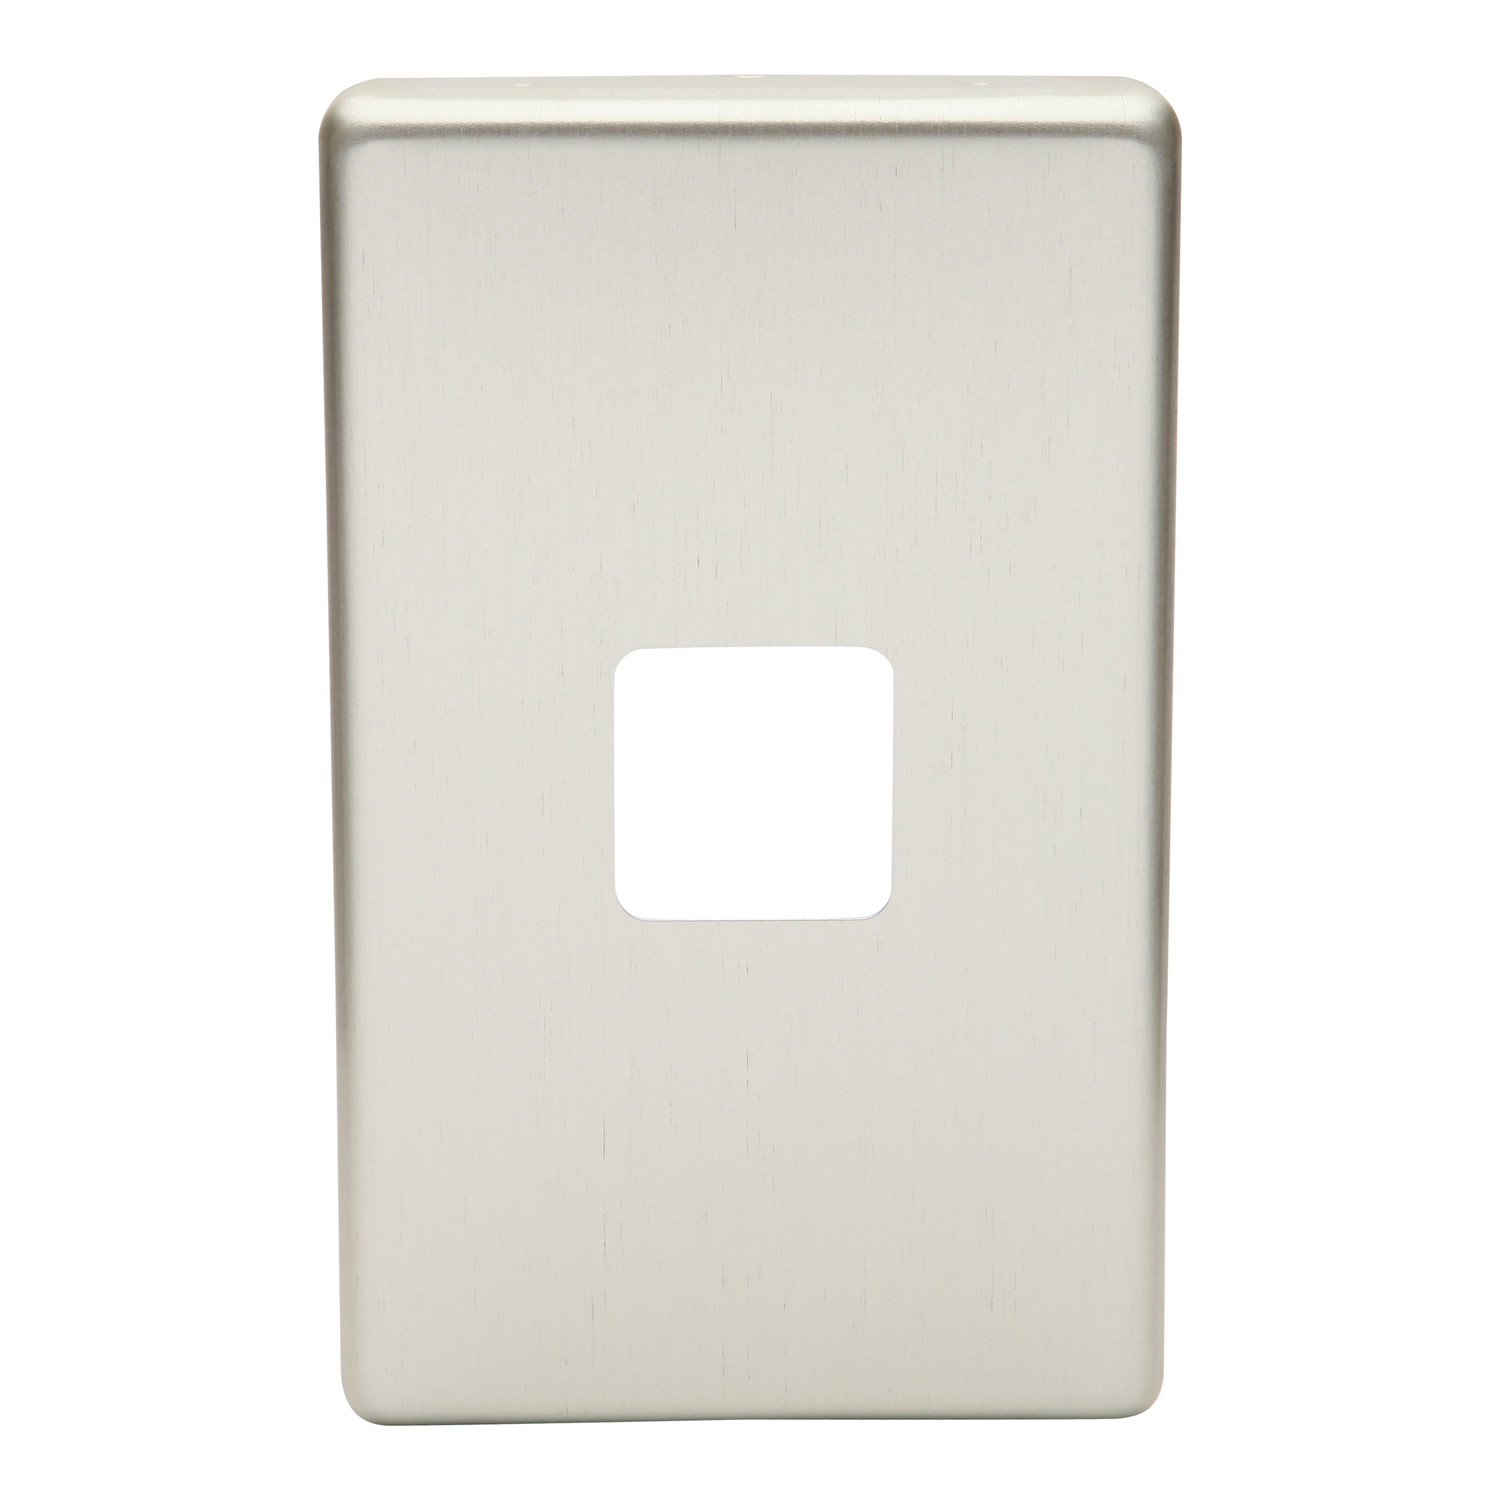 PDL 600 Series - Cover Plate Switch 1-Gang - Stainless steel